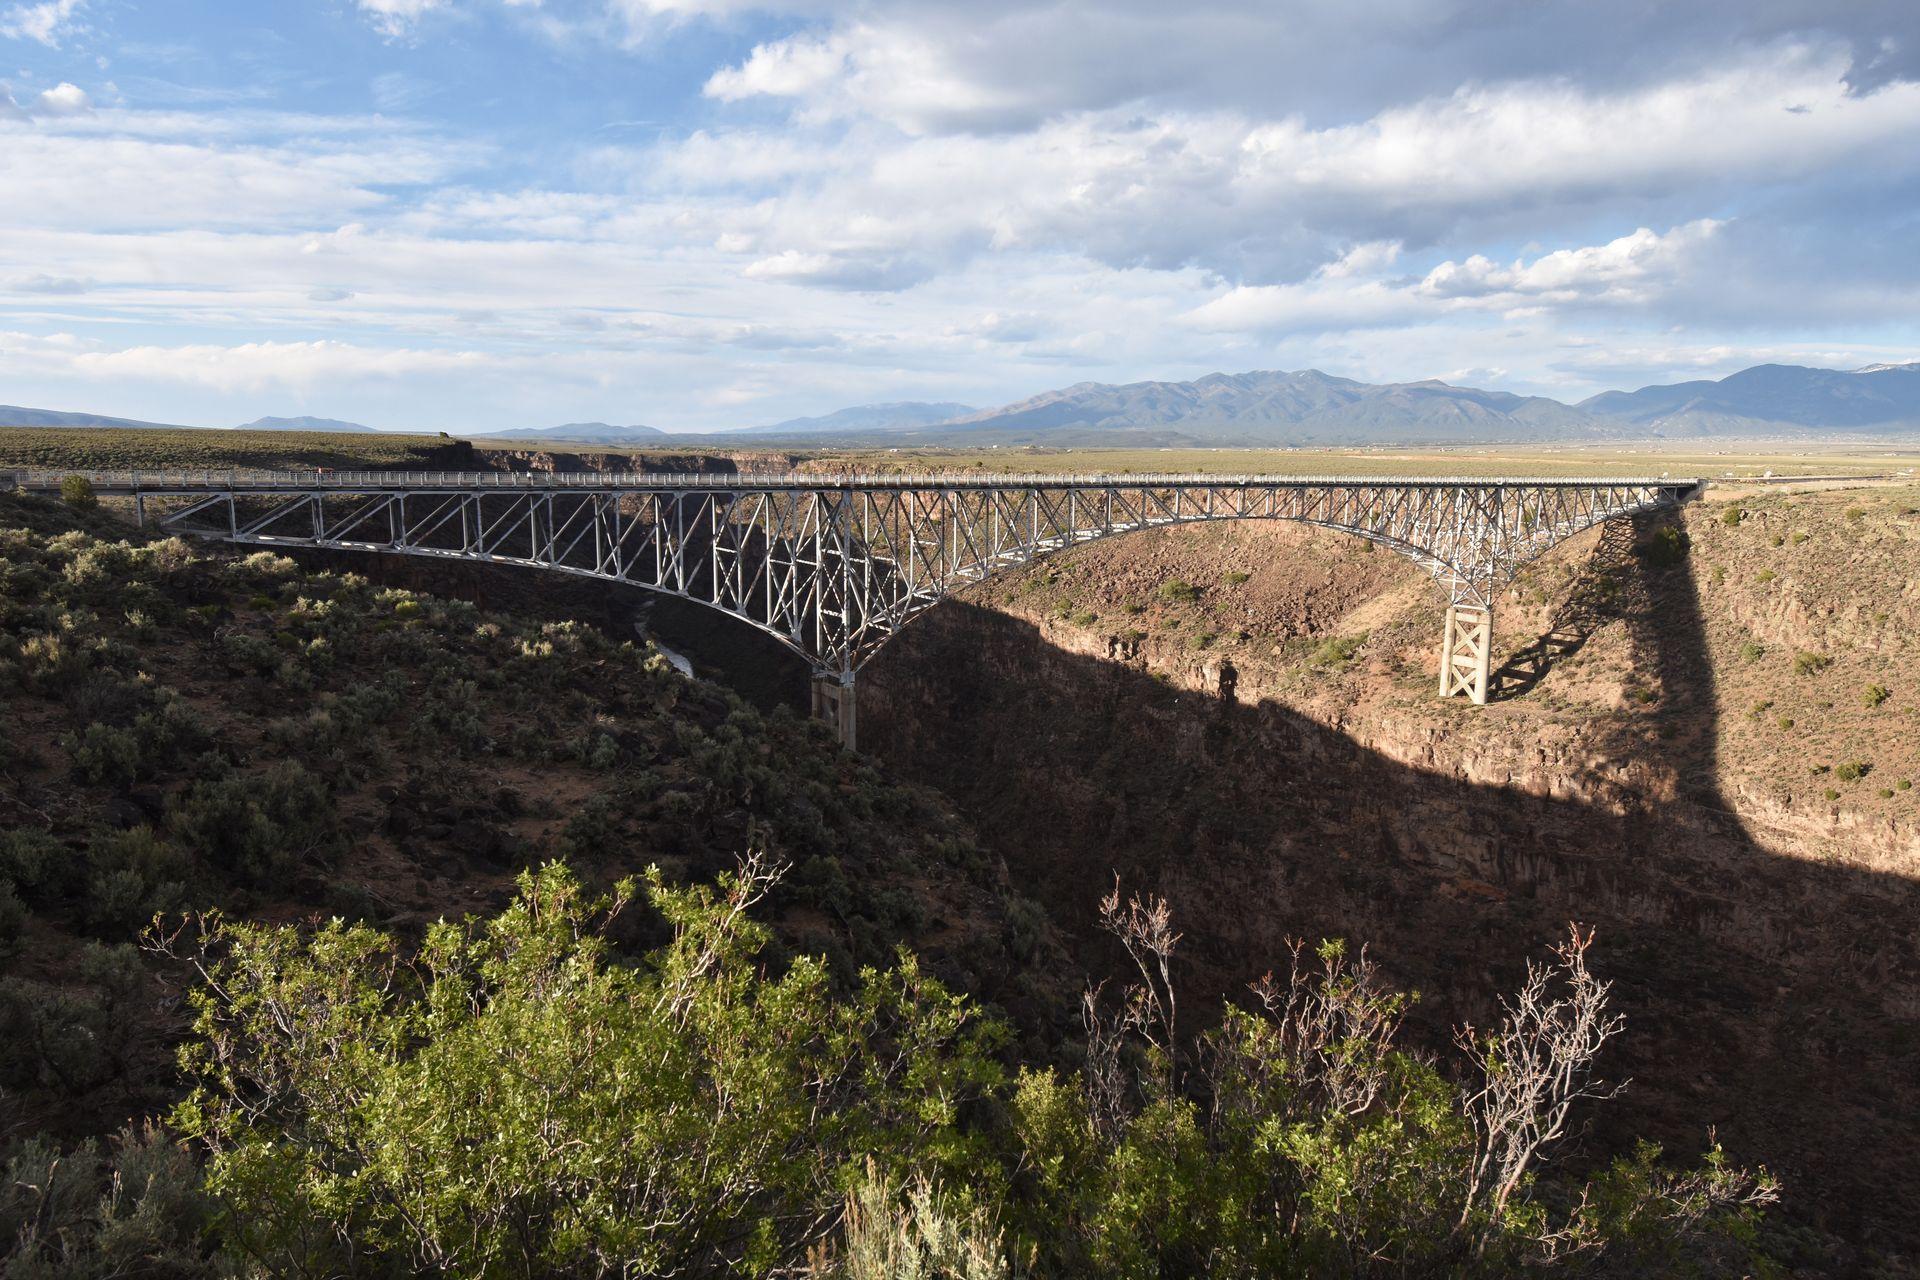 A view of a giant gorge with the Rio Grande Gorge Bridge crossing over the gorge.